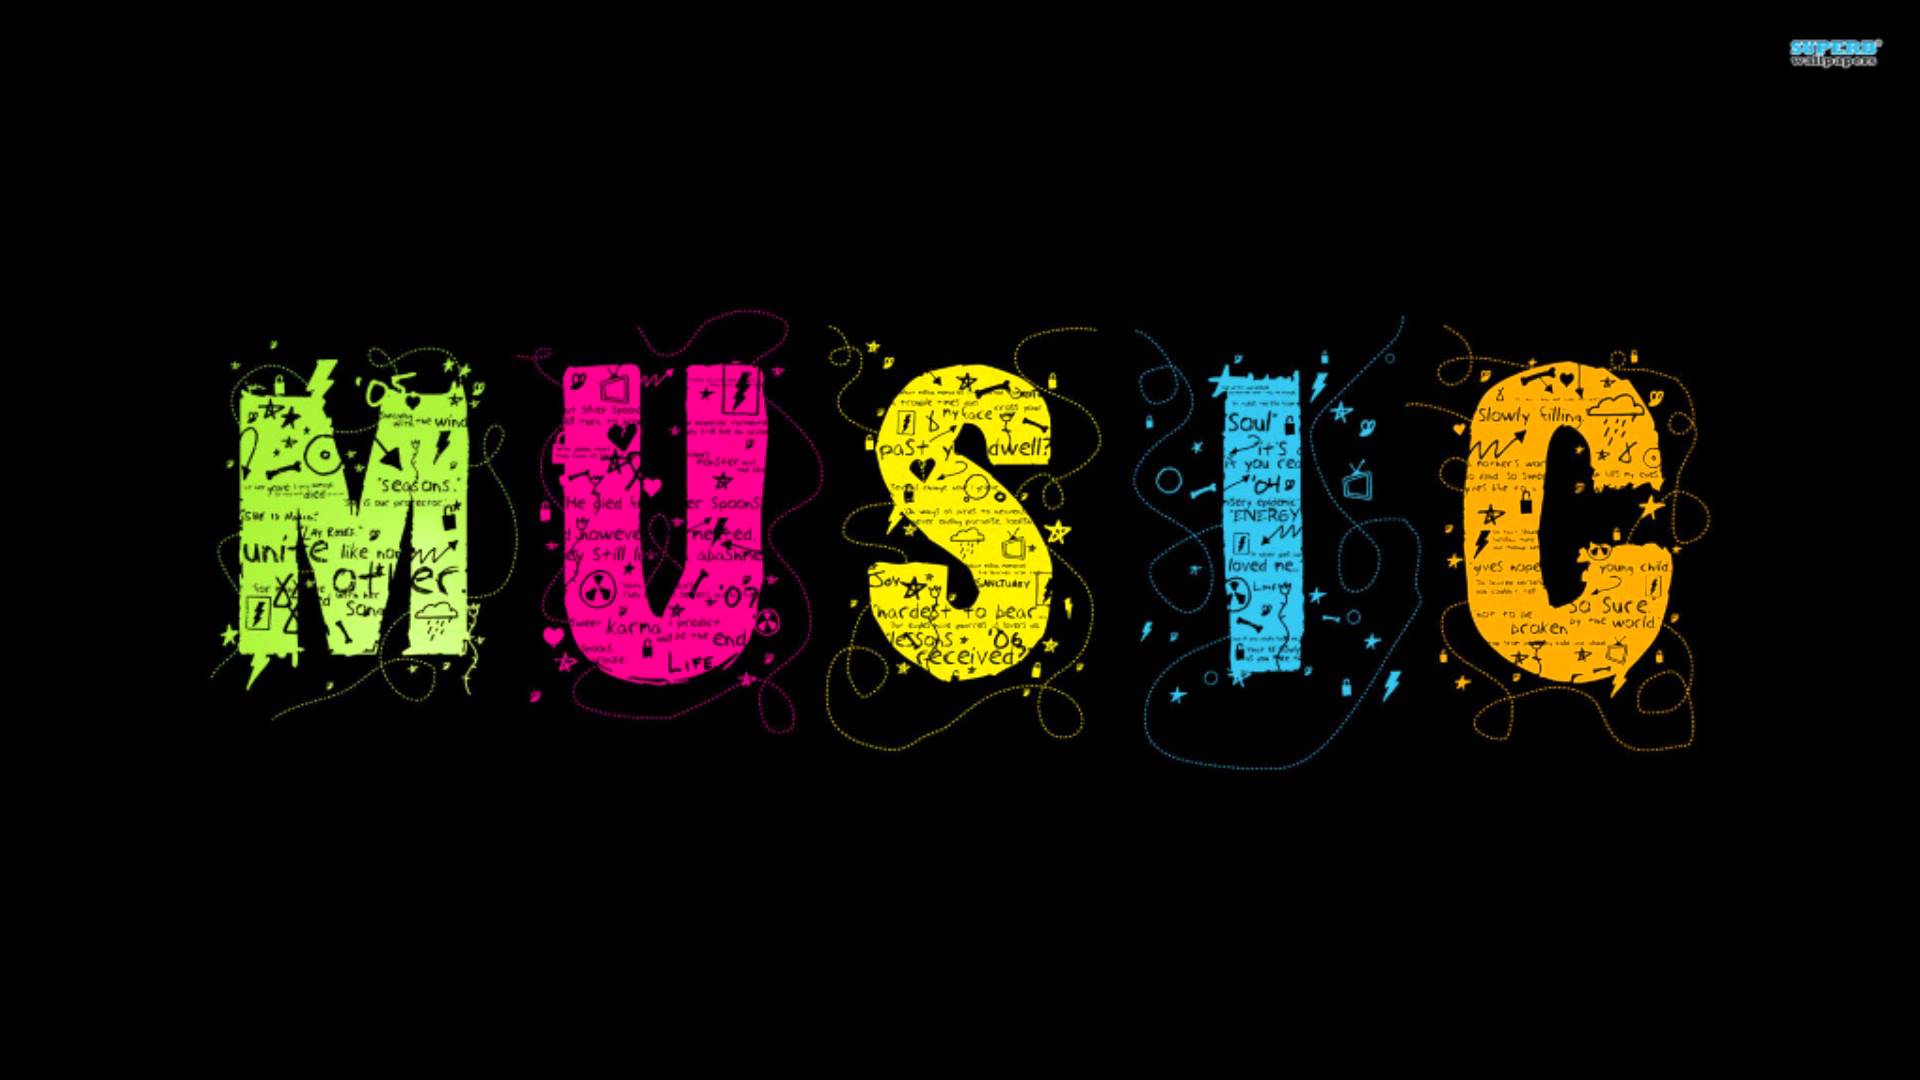 Download Free Music Wallpapers pictures in high definition or